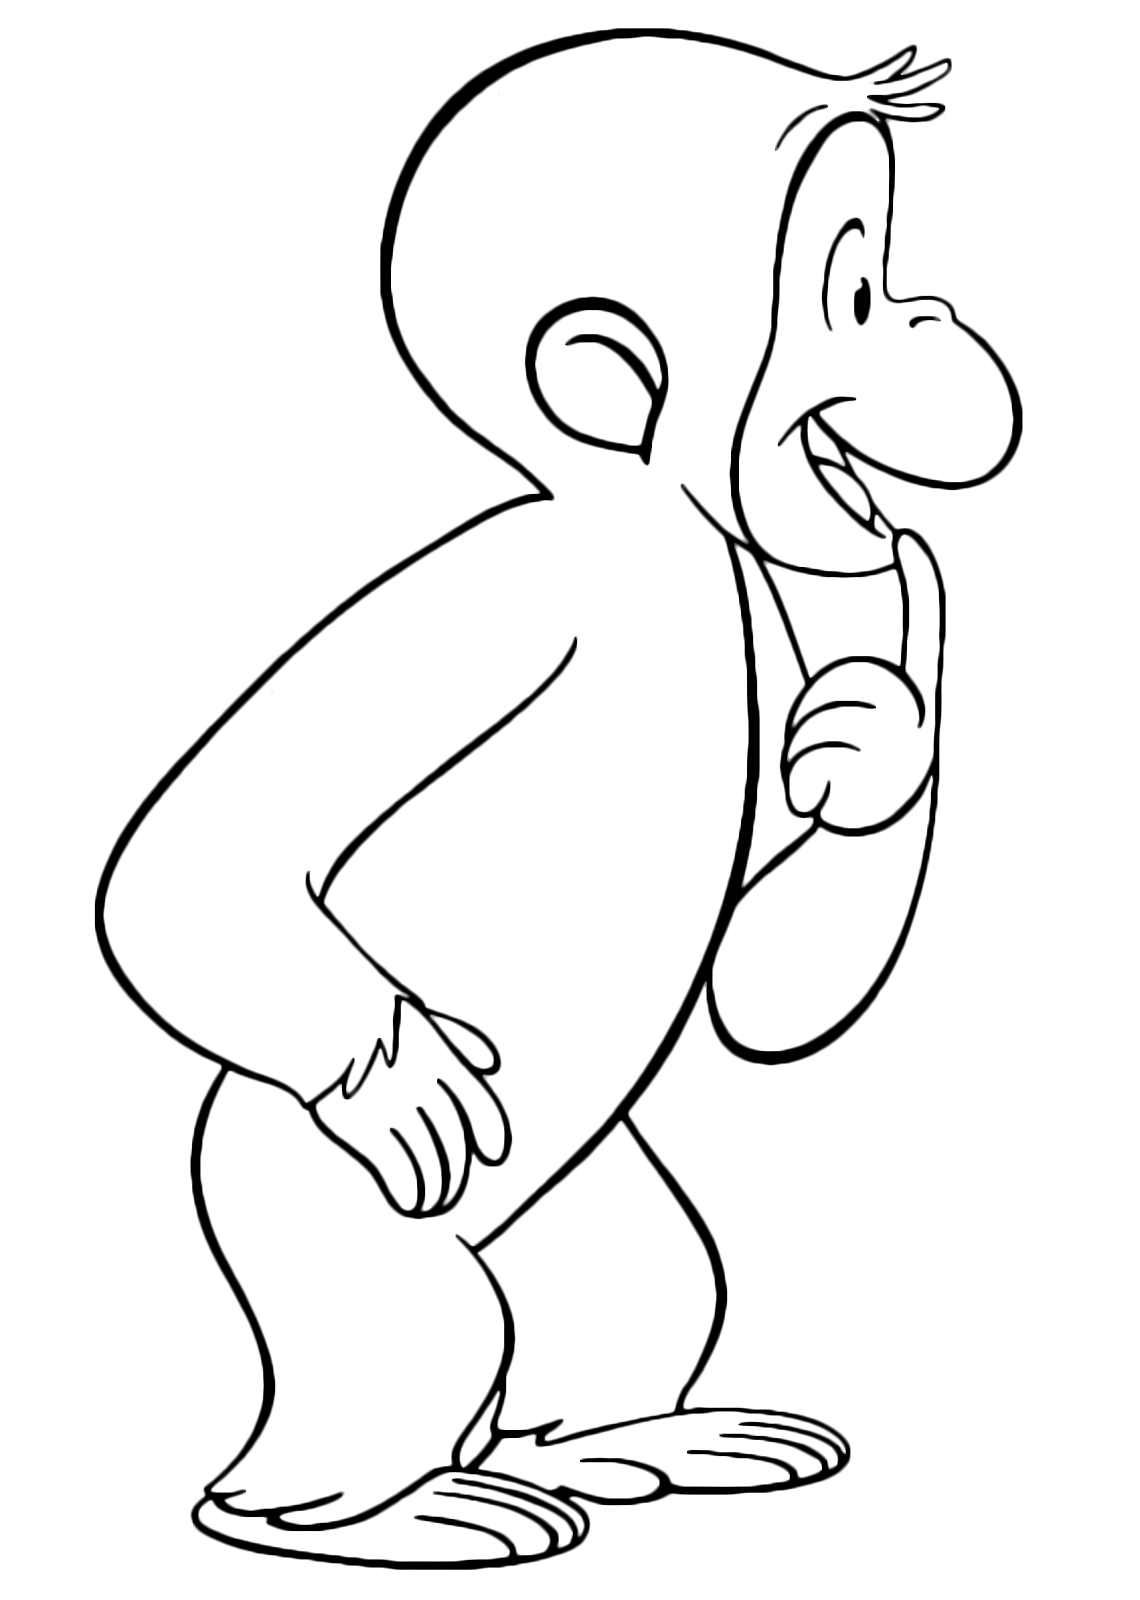 Curious George - George is thinking about what to do